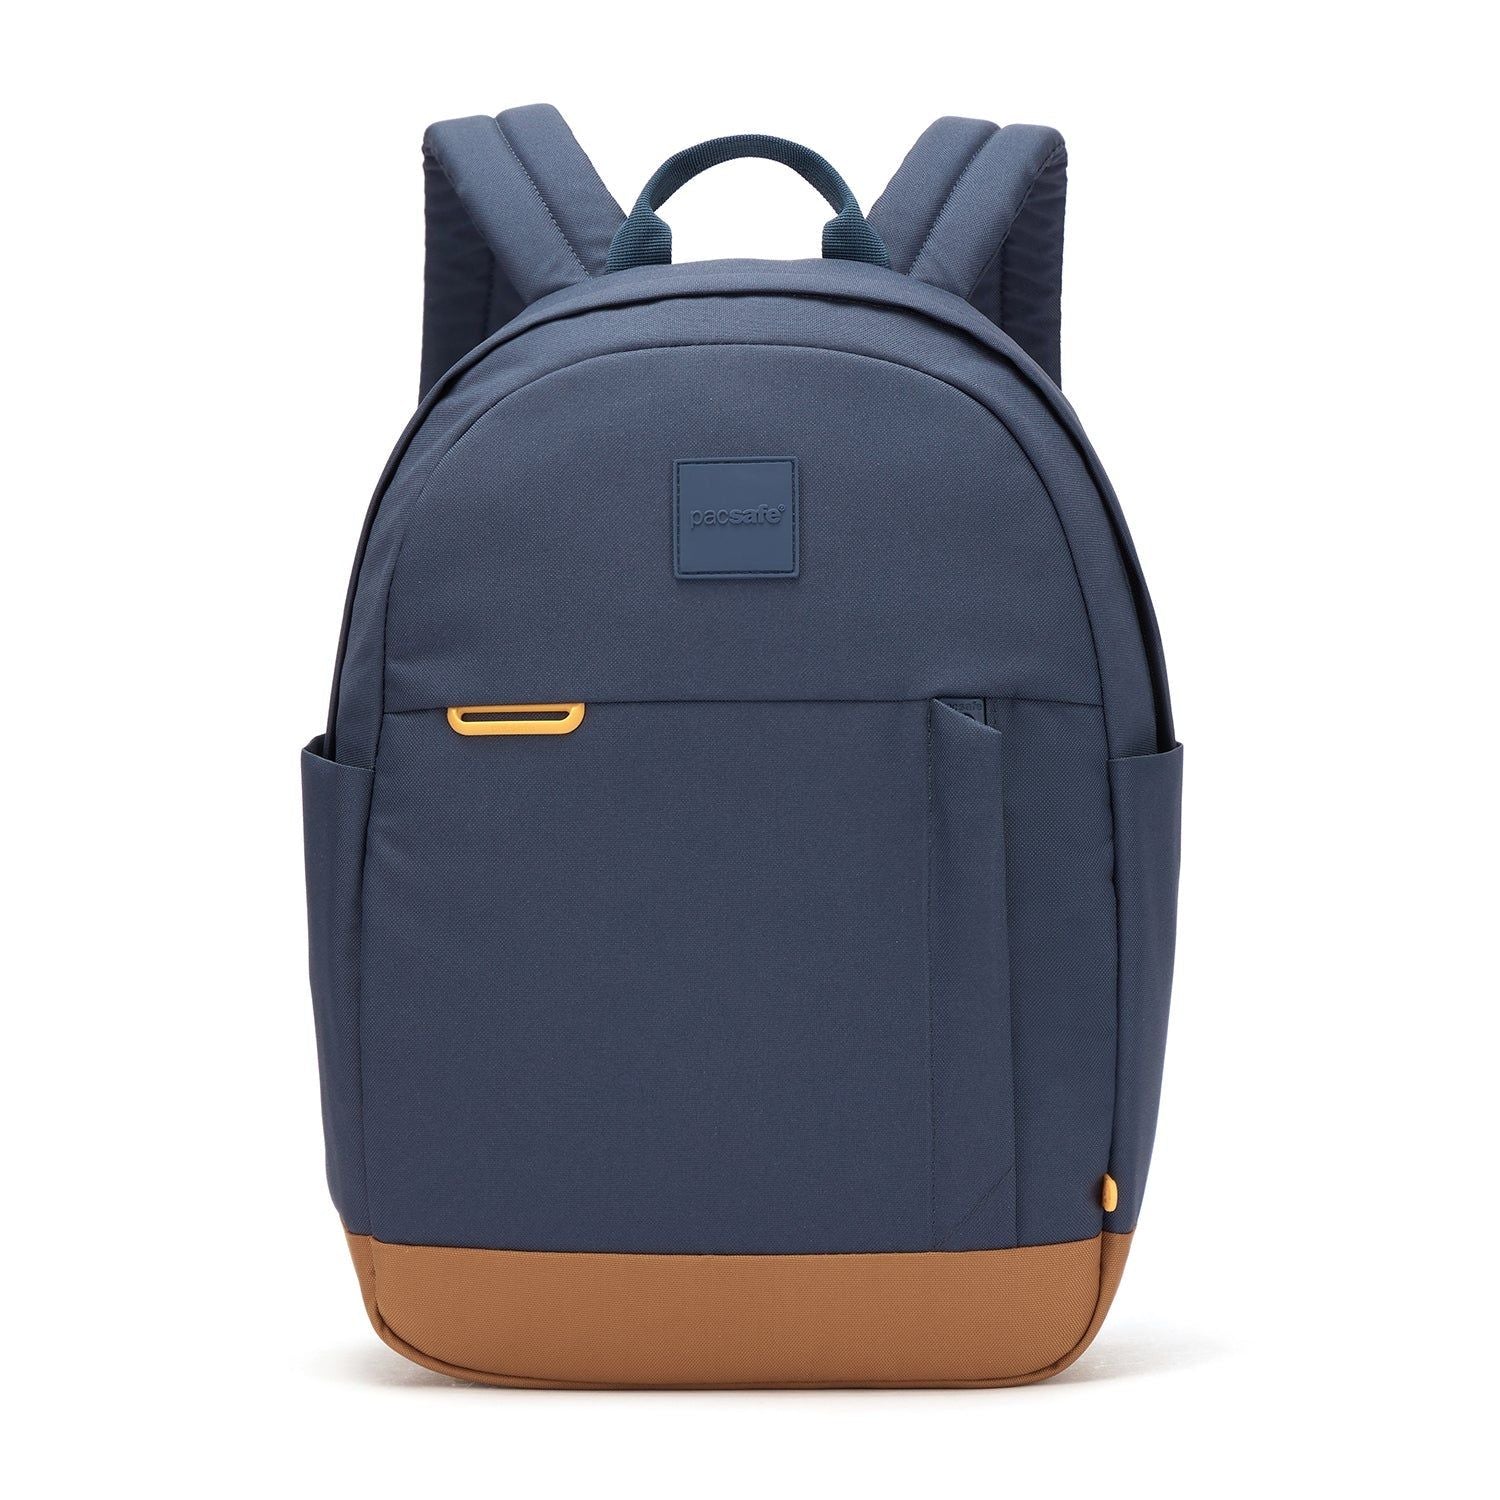 PacsafeGo 15L Anti-Theft Backpack - rainbowbags